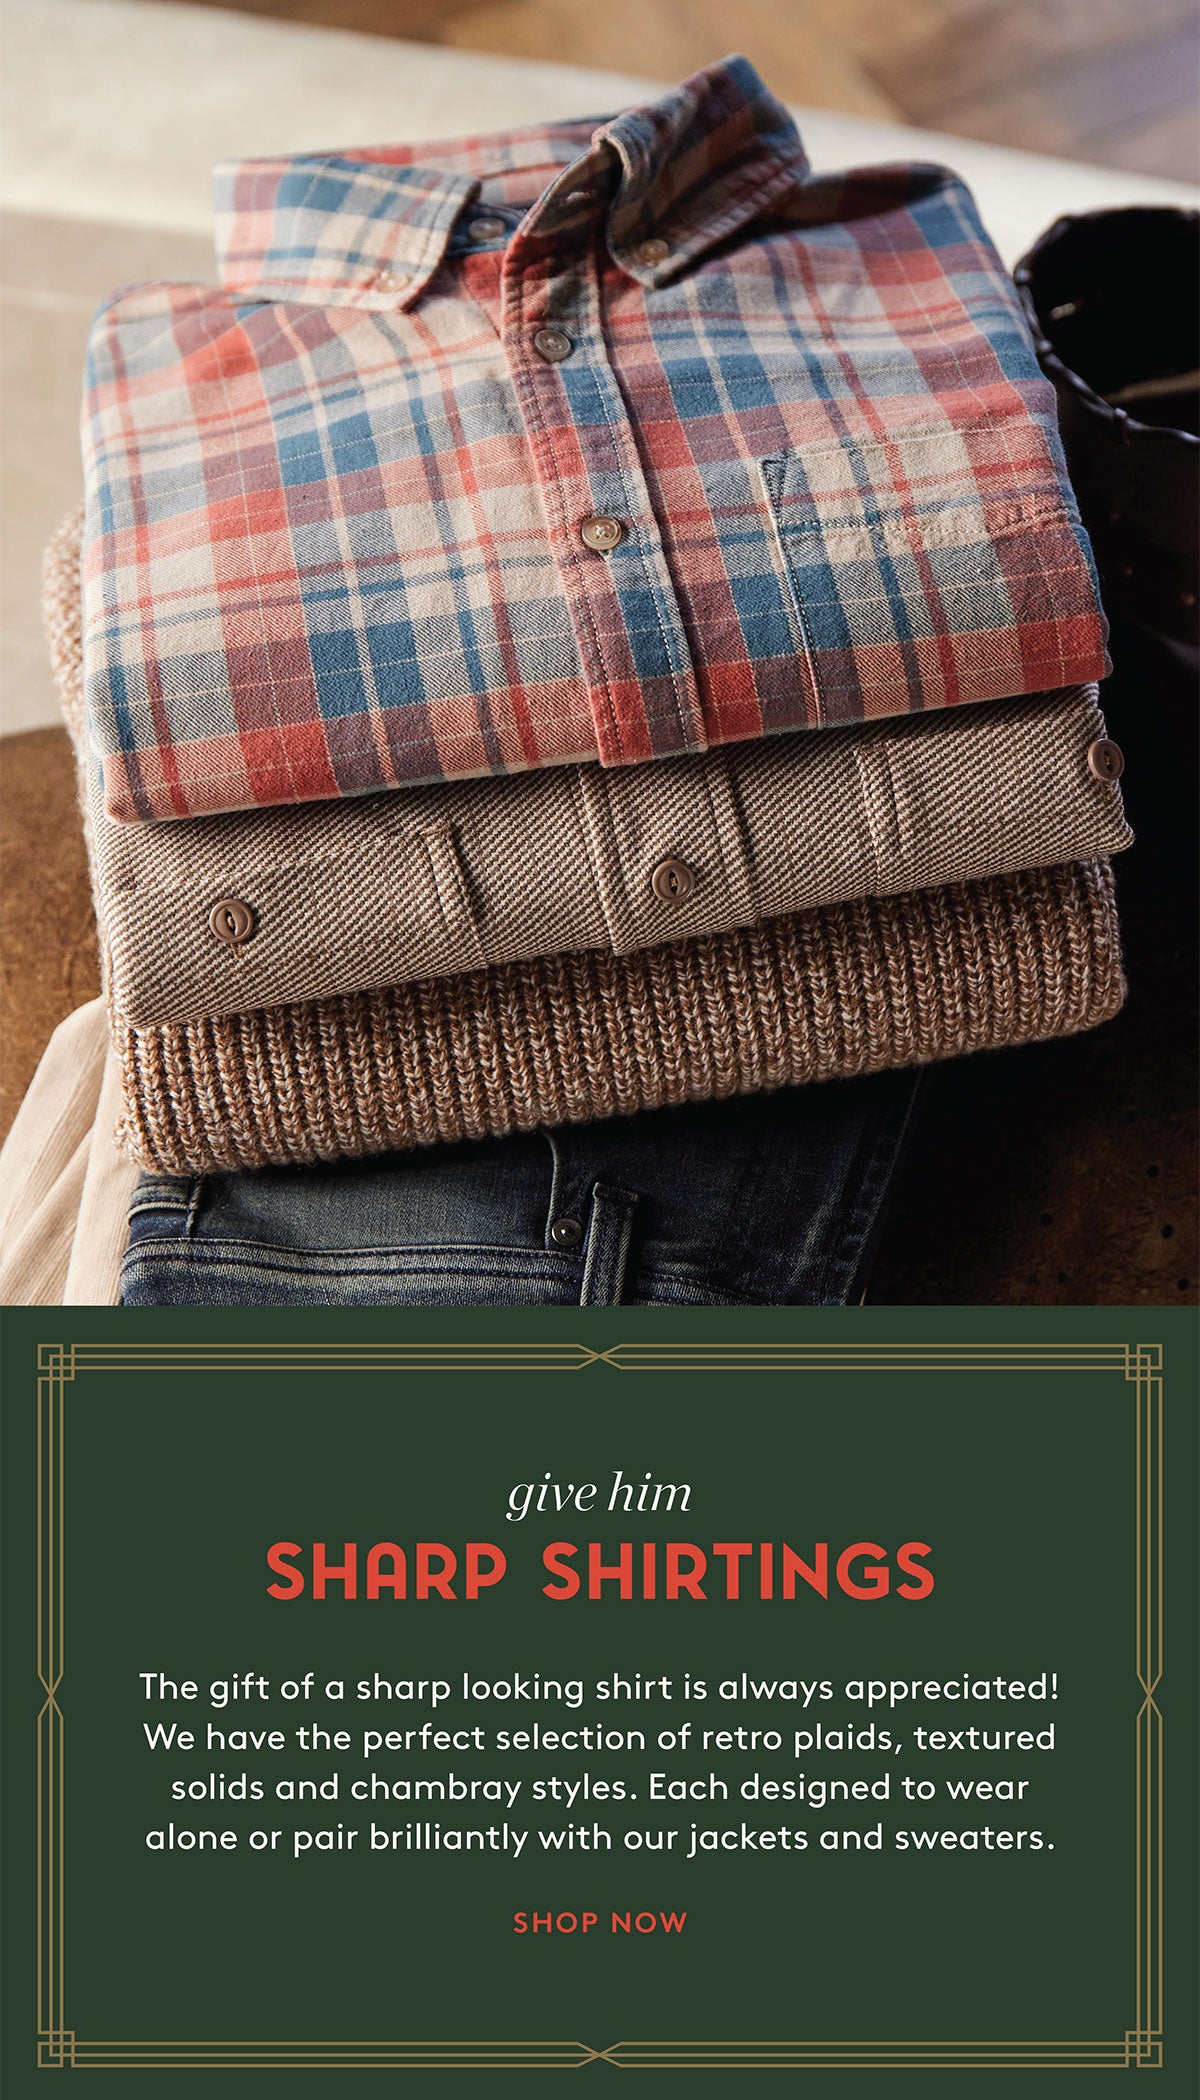 give him SHARP SHIRTINGS     The gift of a sharp looking shirt is always appreciated! We have the perfect selection of retro plaids, textured solids and chambray styles. Each designed to wear alone or pair brilliantly with our jackets and sweaters.   SHOP NOW